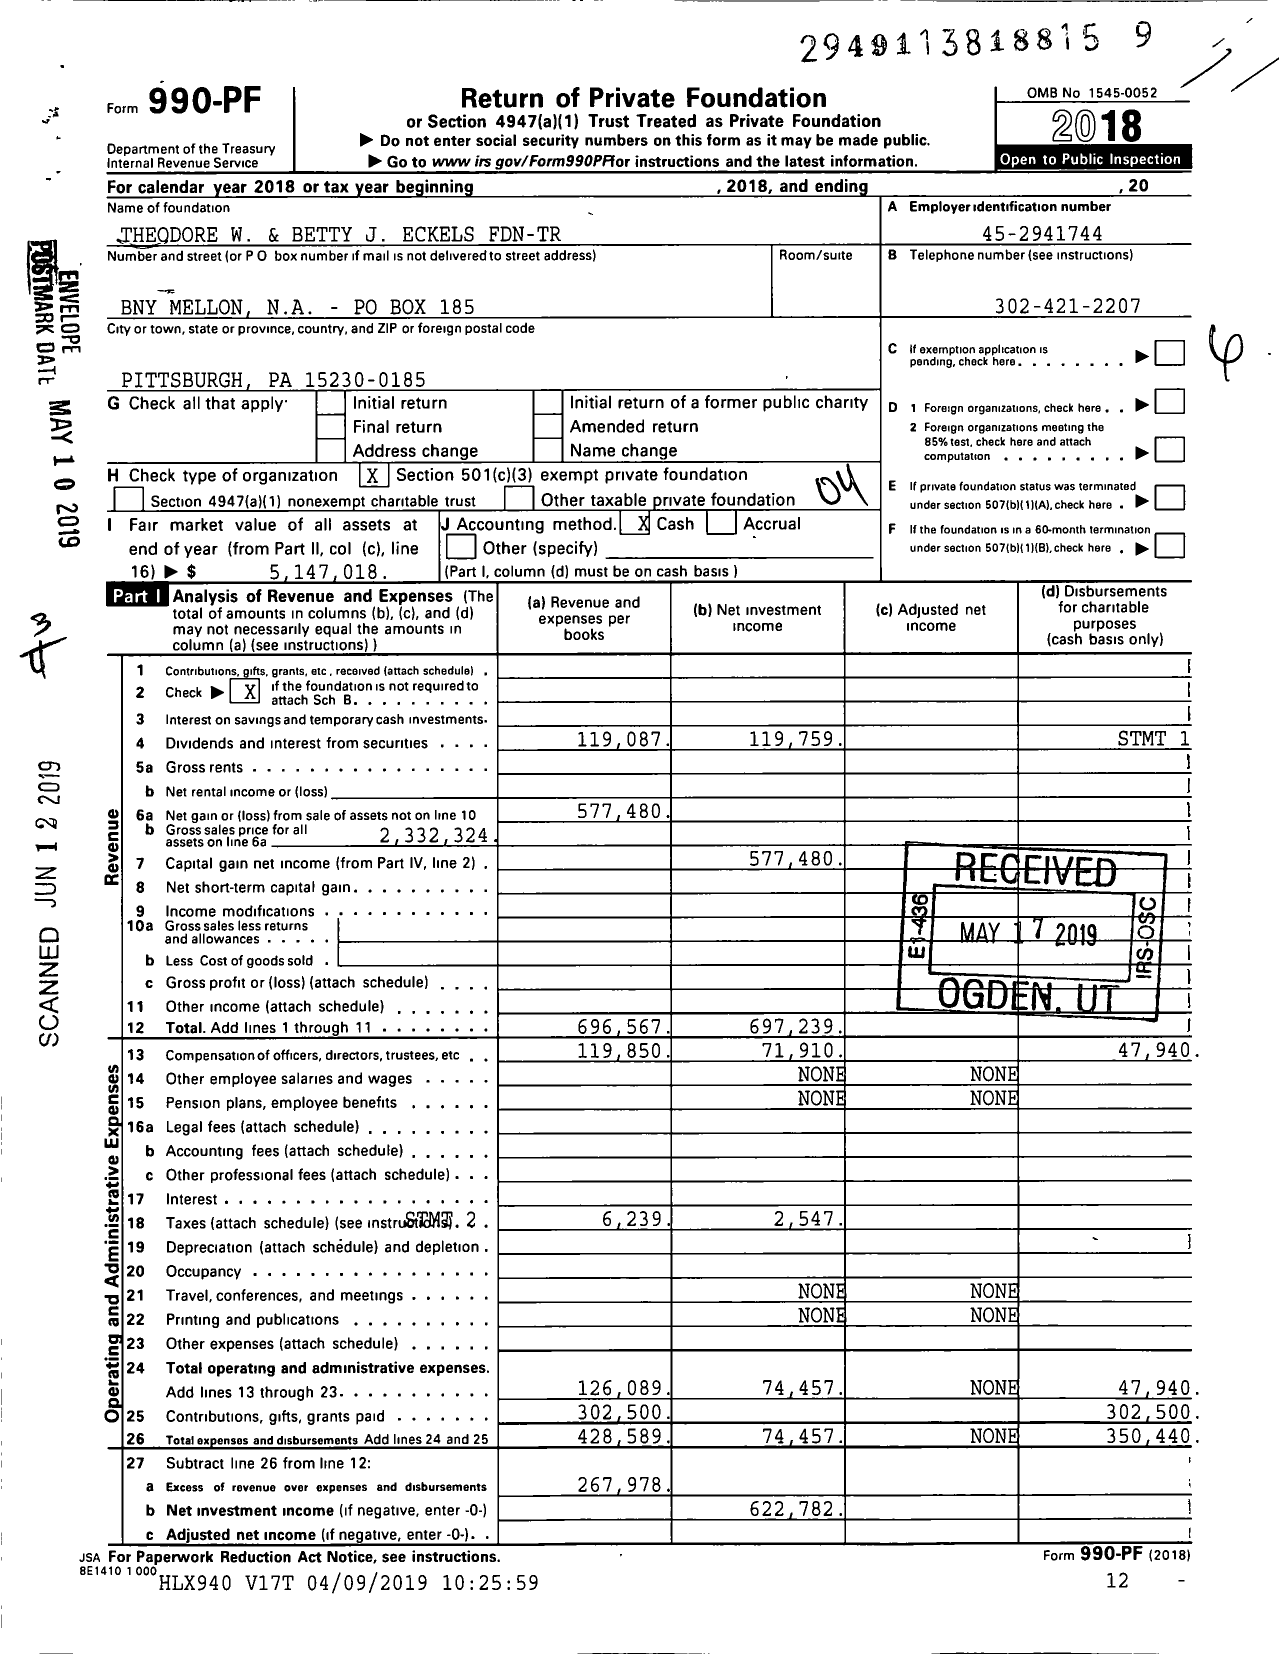 Image of first page of 2018 Form 990PF for Theodore W and Betty J Eckels FDN-TR